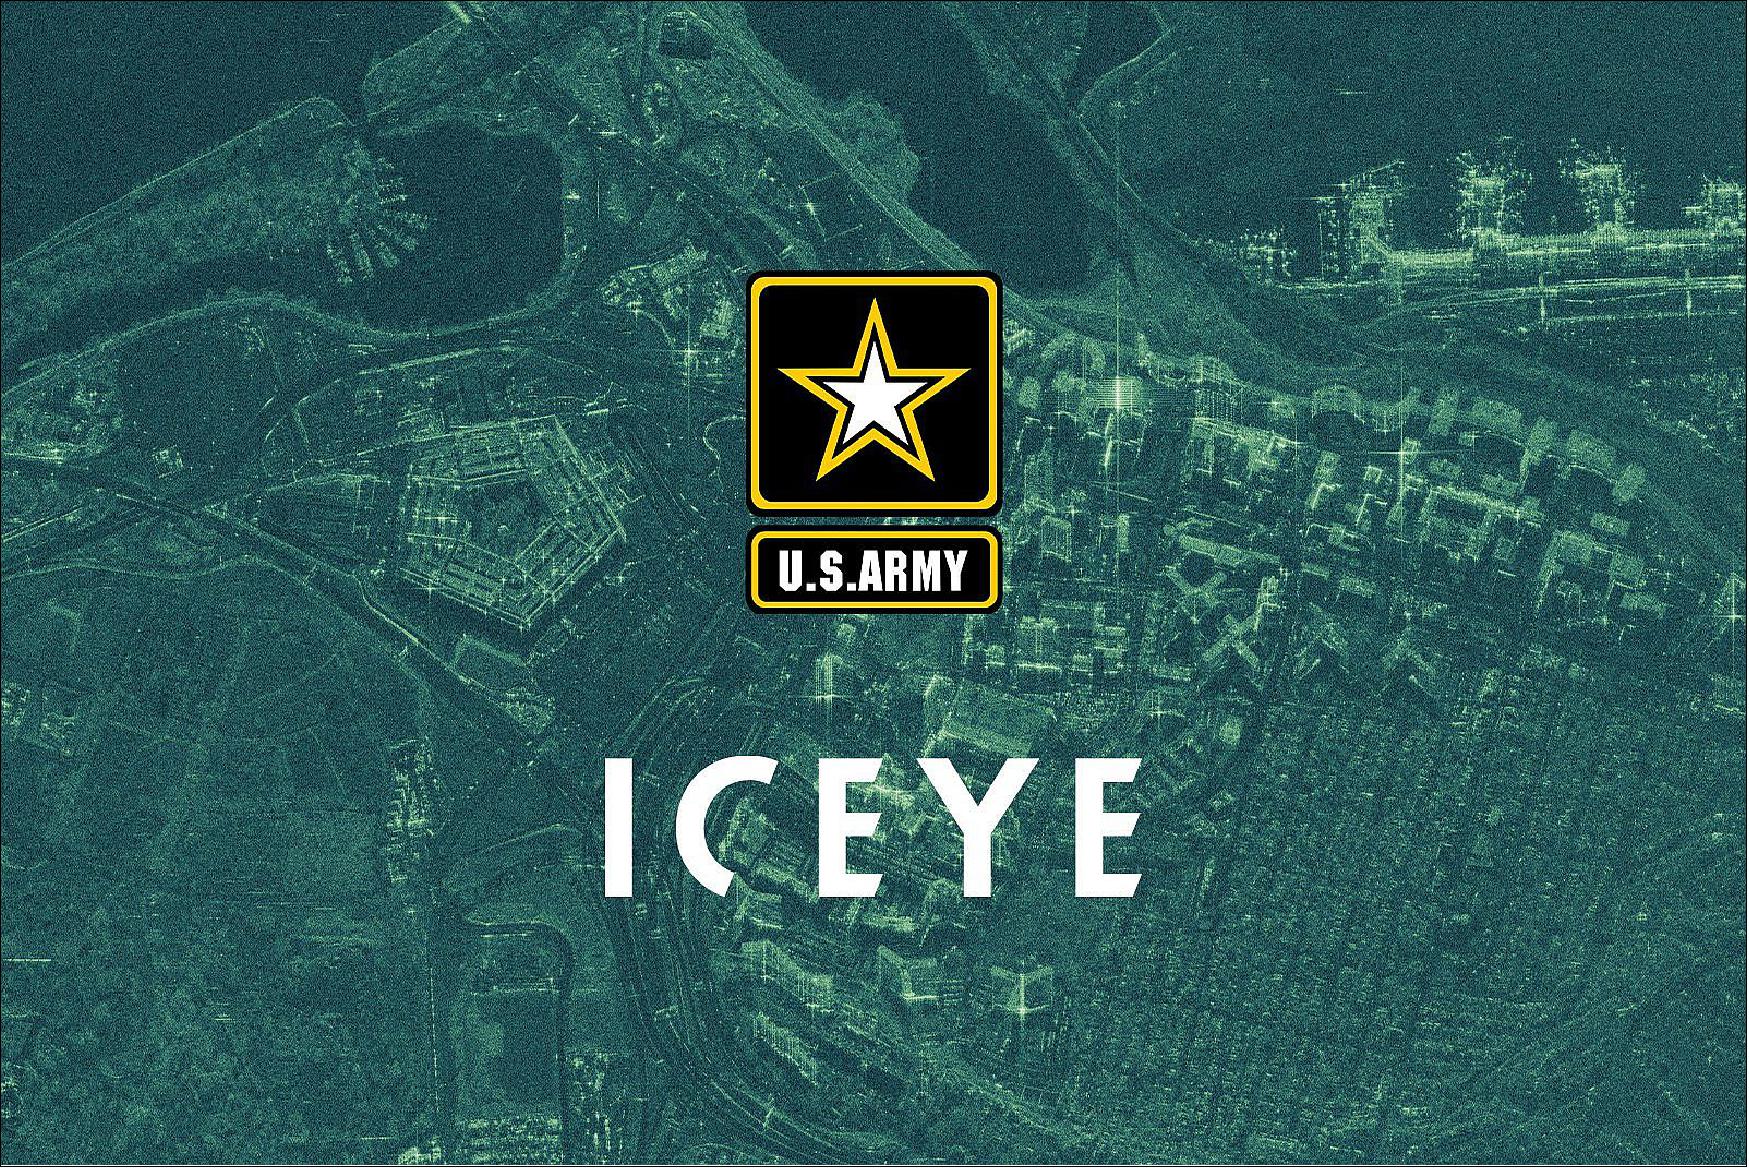 Figure 17: ICEYE and U.S. Army logos with a SAR satellite image of Washington, DC in the background and Arlington,VA (image credit: ICEYE)